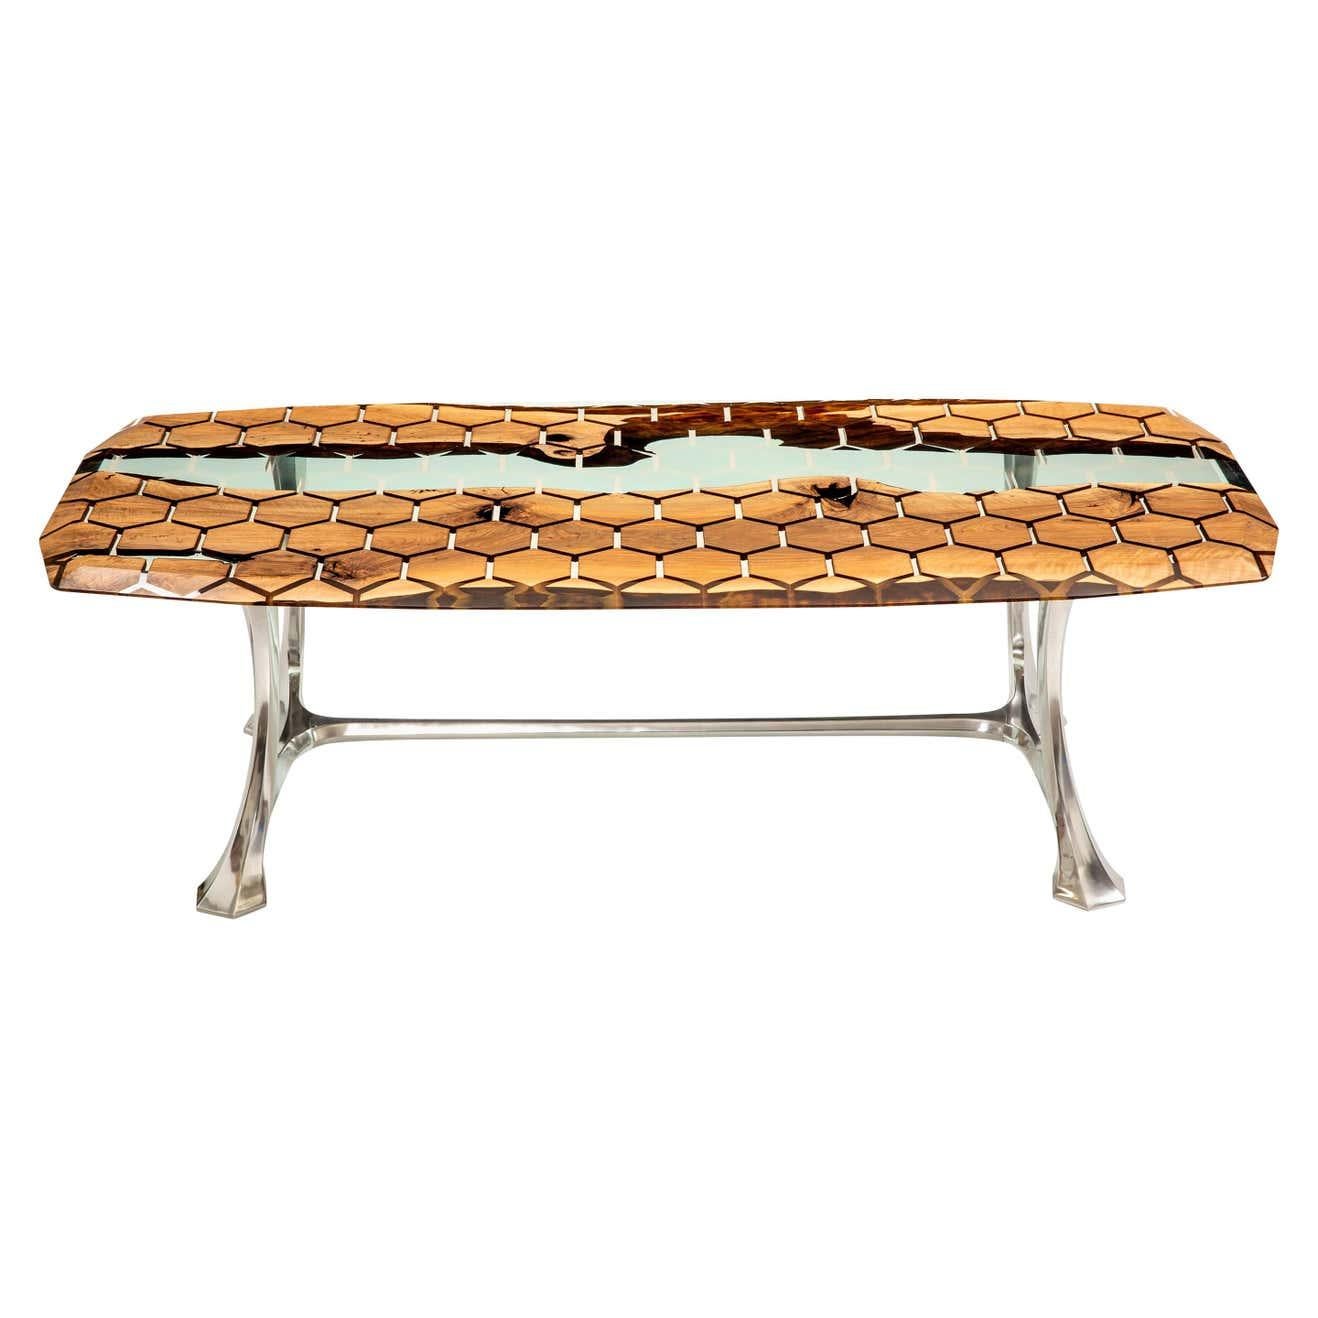 SALE ! Honeycomb Epoxy Resin Table - Ready to Ship!  For Sale 1